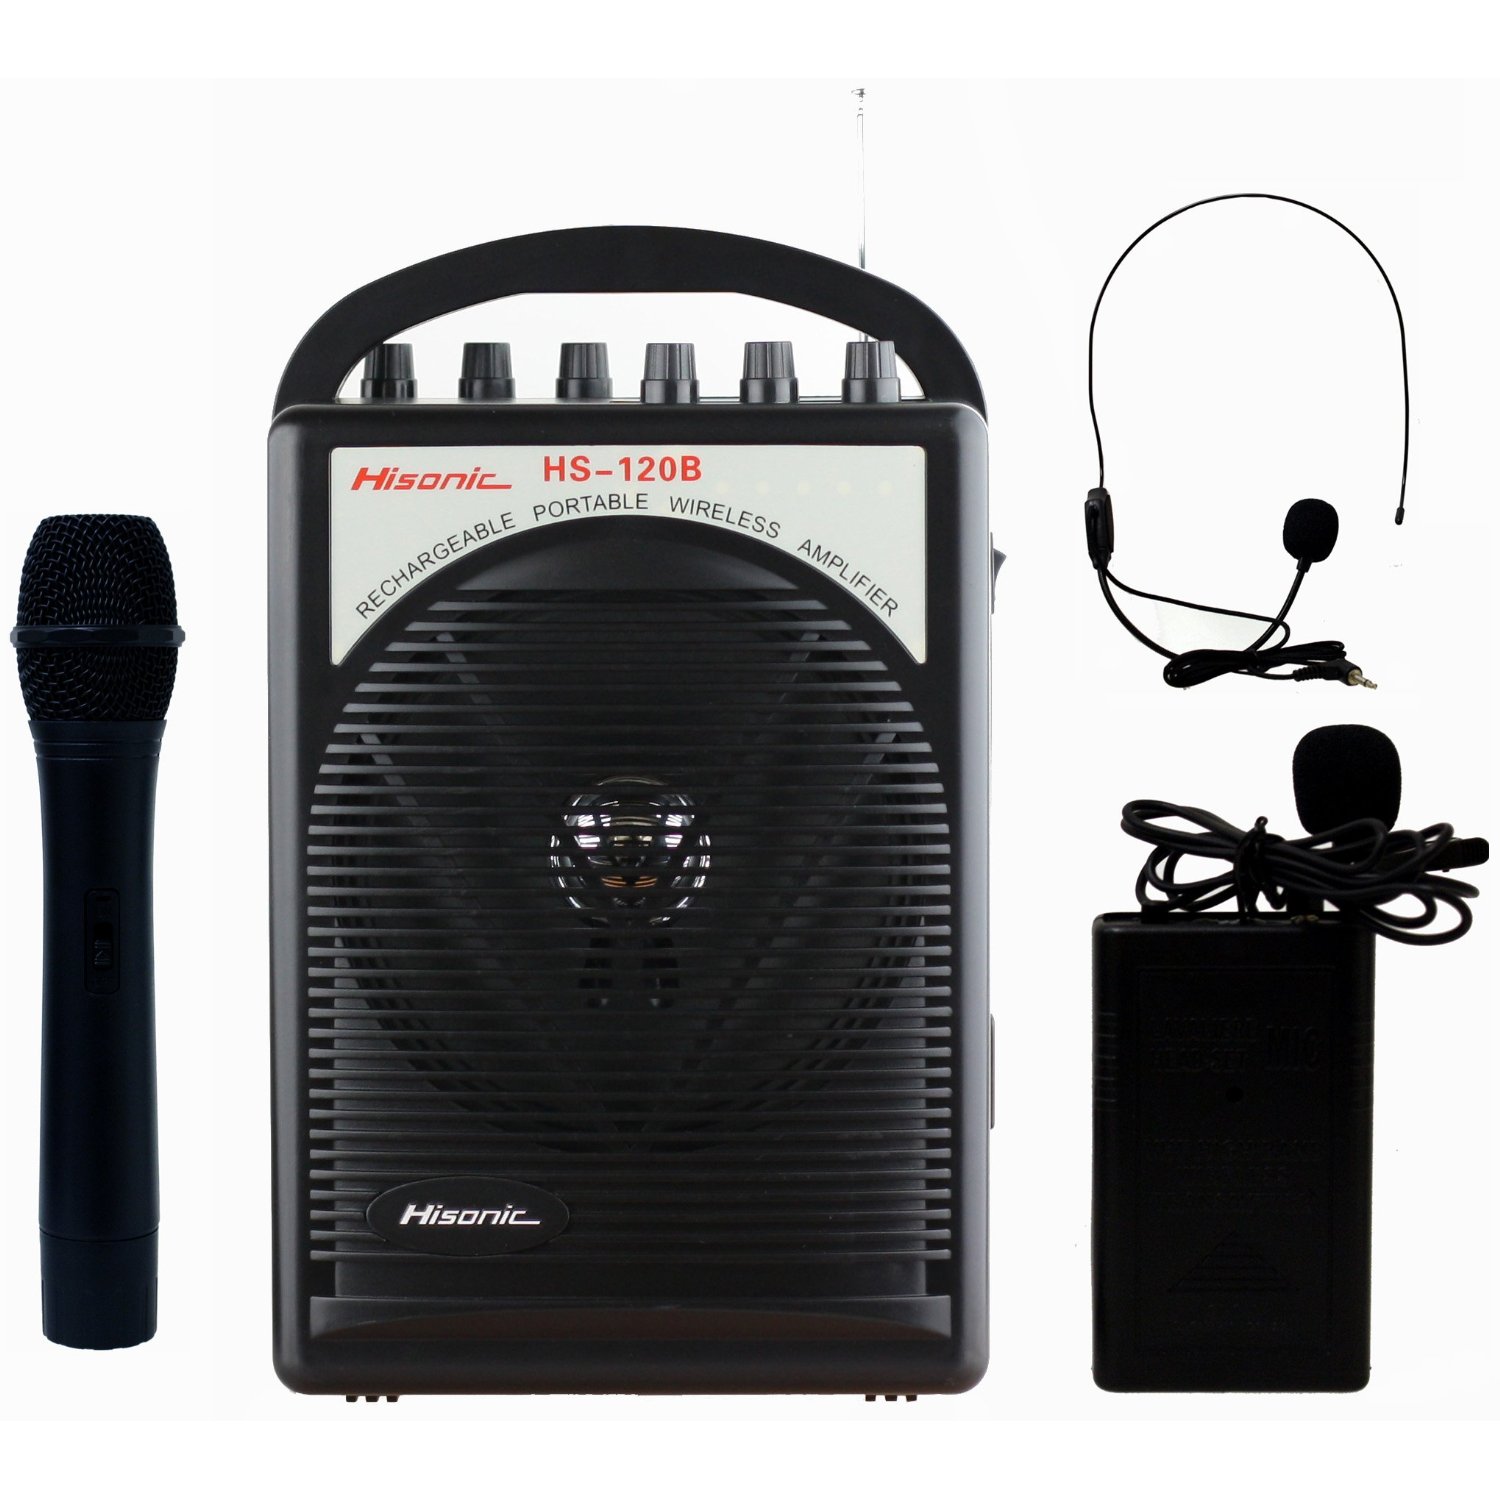 http://thetechjournal.com/wp-content/uploads/images/1110/1319510479-hisonic-hs120b-portable-pa-system-with-wireless-microphones-2.jpg